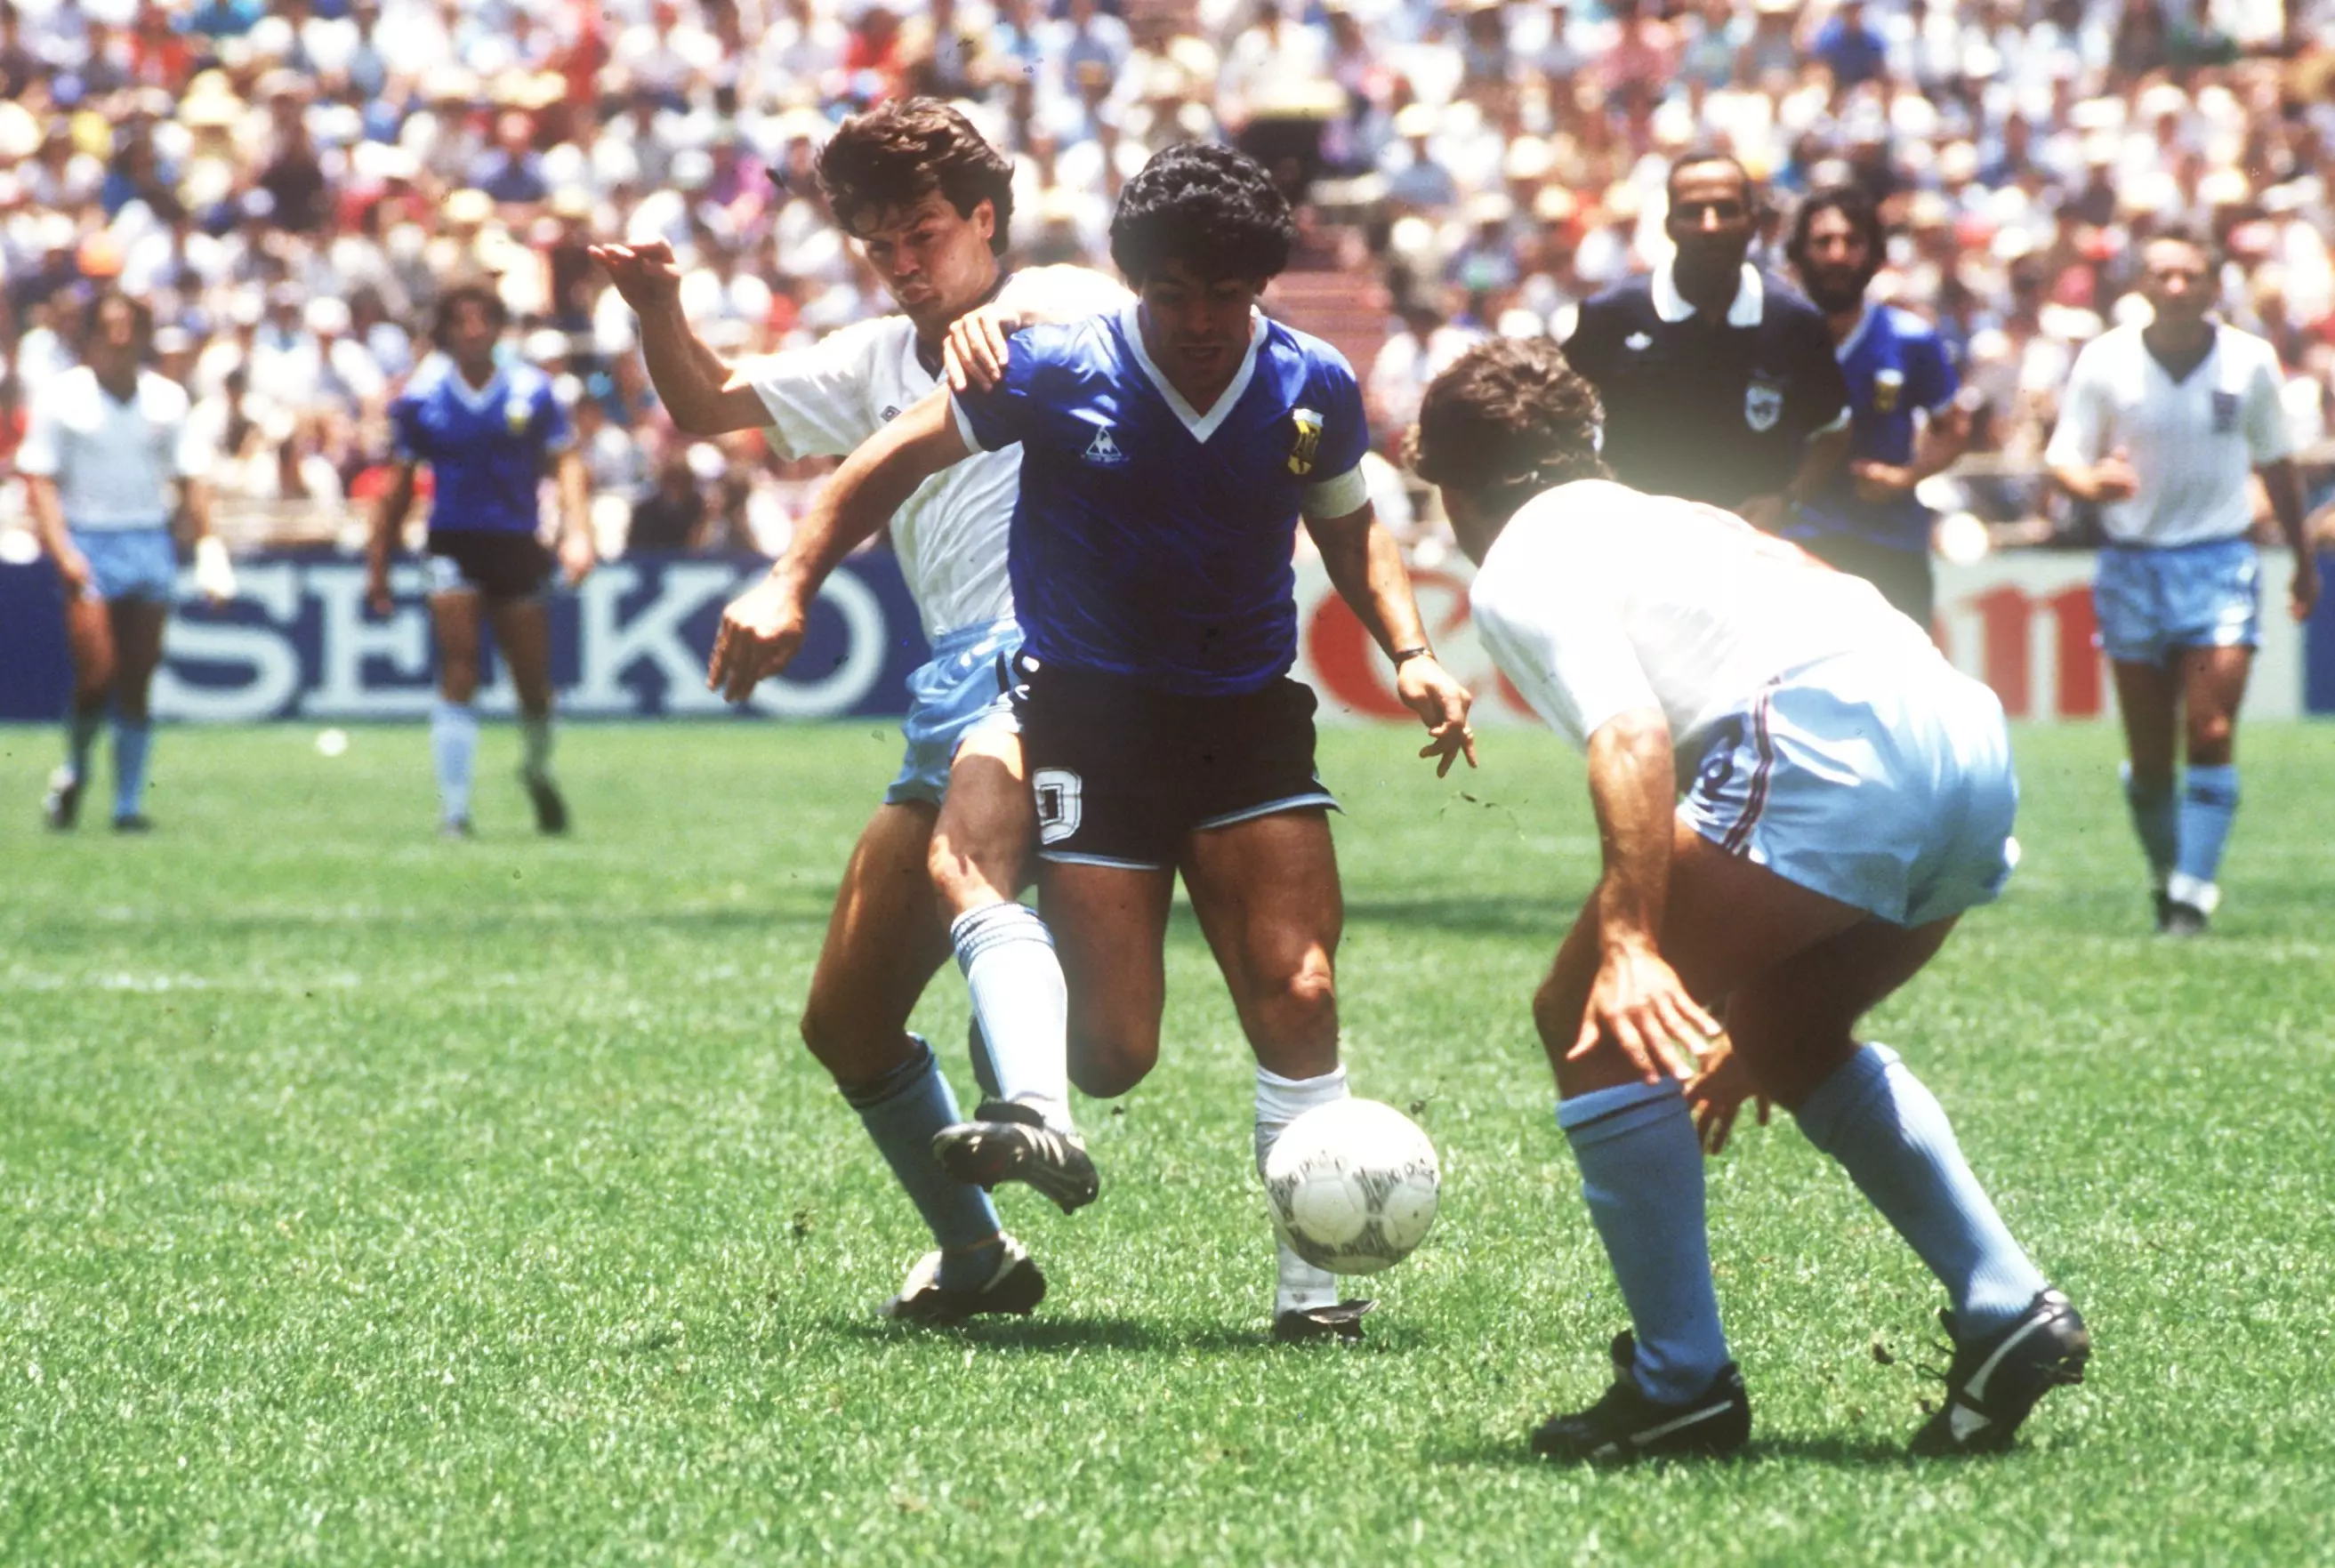 Maradona in action against England at the 1986 World Cup. (Image